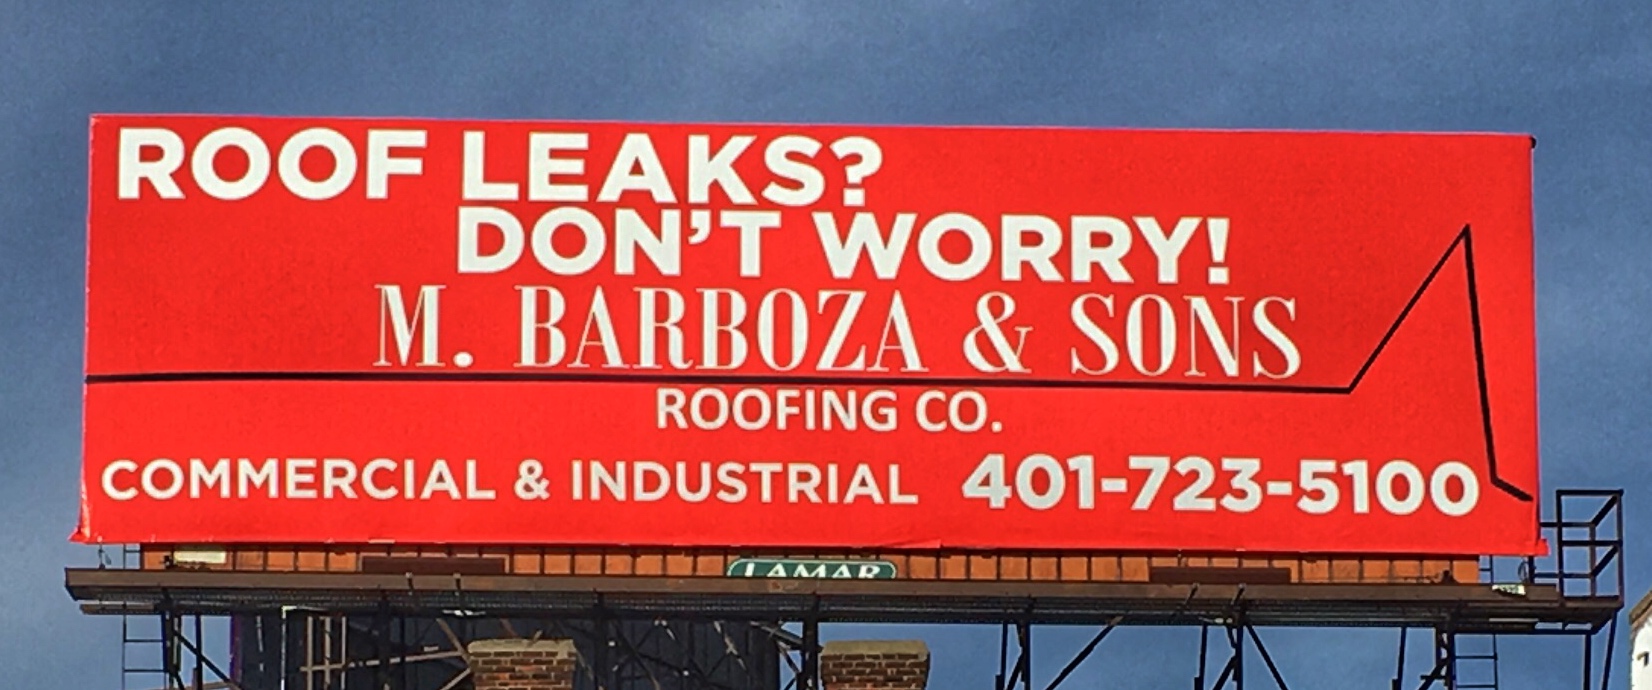 M. Barboza & Sons Roofing Co Inc 476 Roosevelt Ave, Central Falls Rhode Island 02863